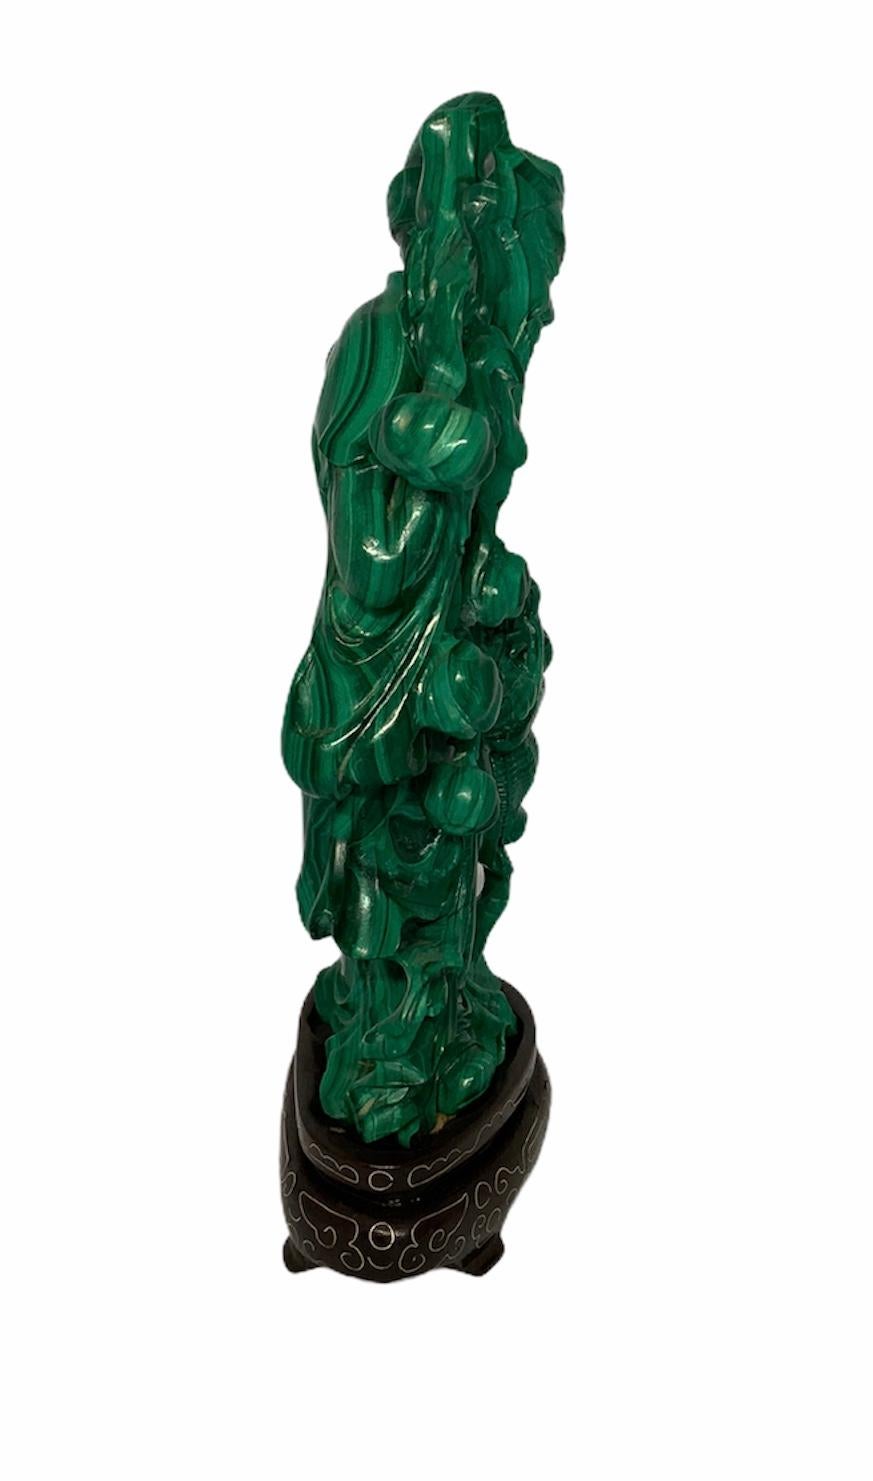 Chinese Hand Carved Malachite Statue of Shou Xing Gong